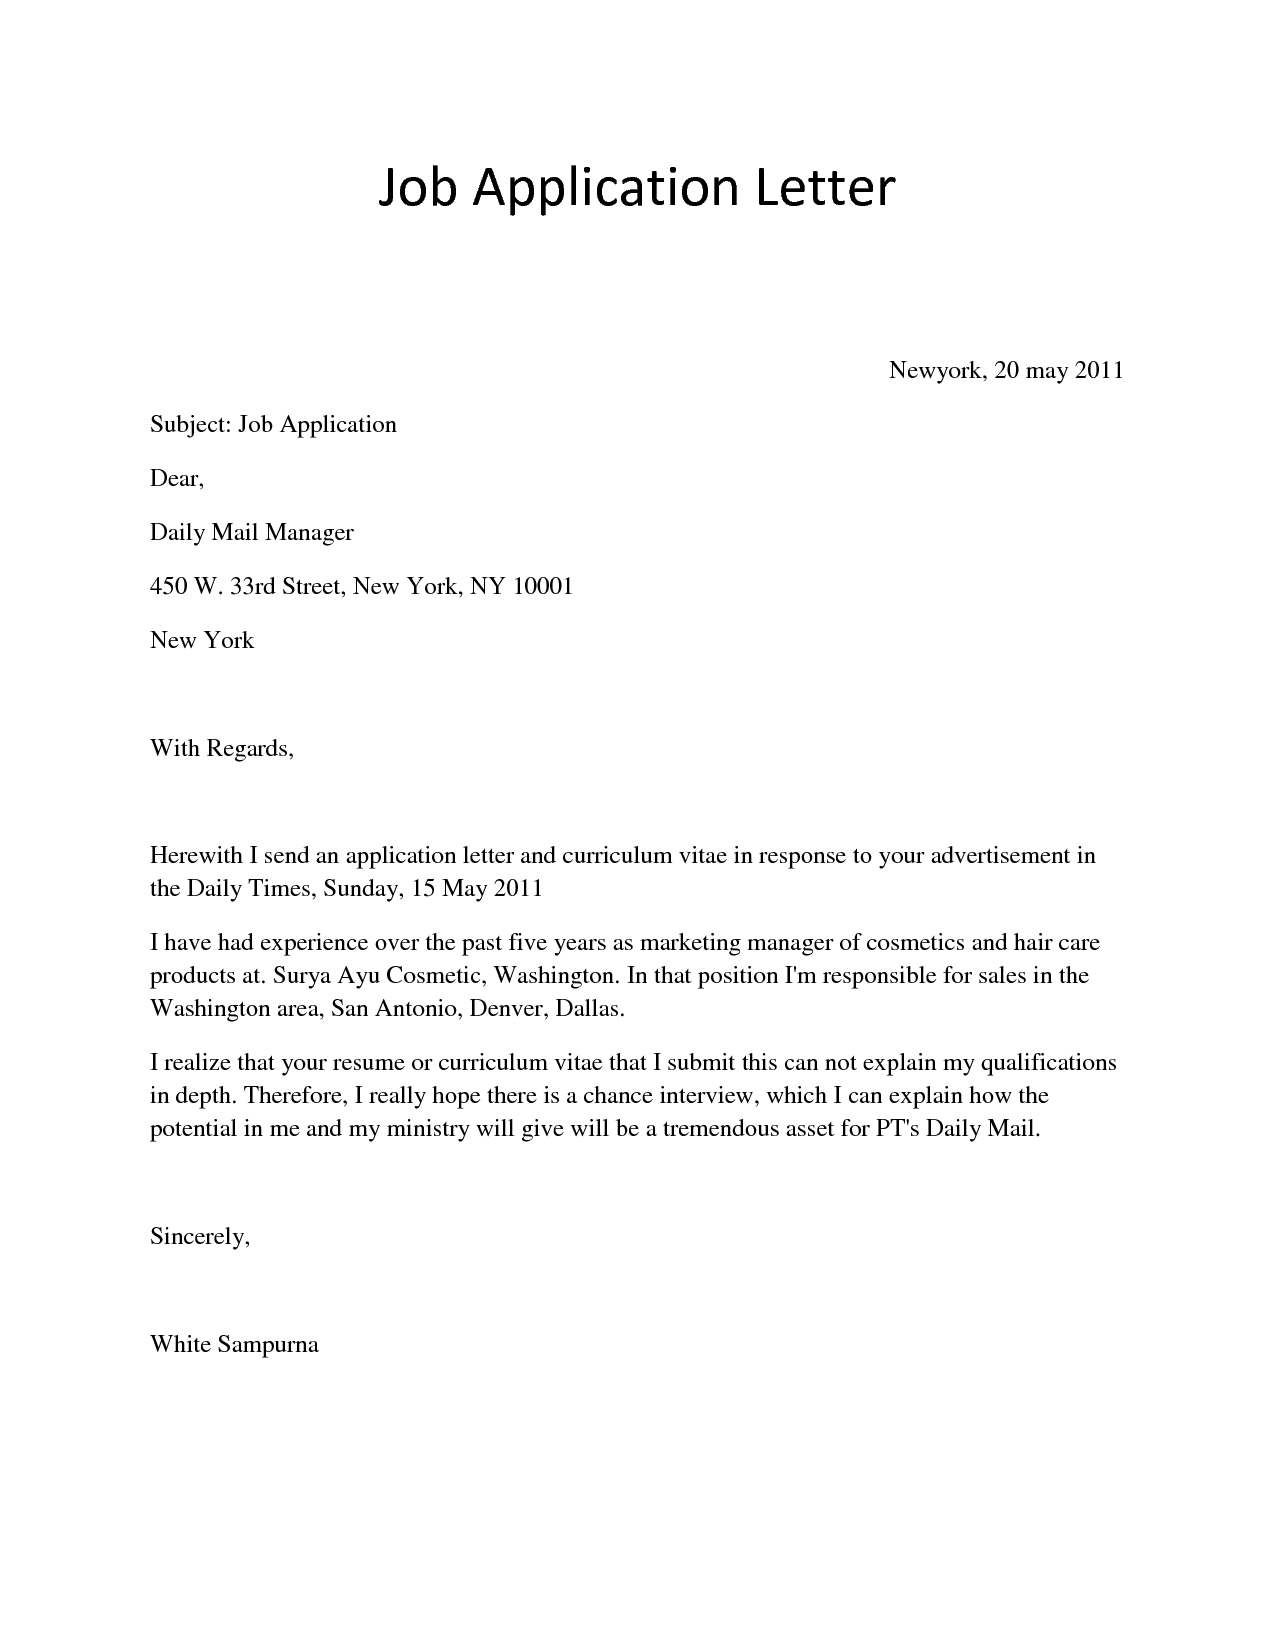 job application letter with resume sample